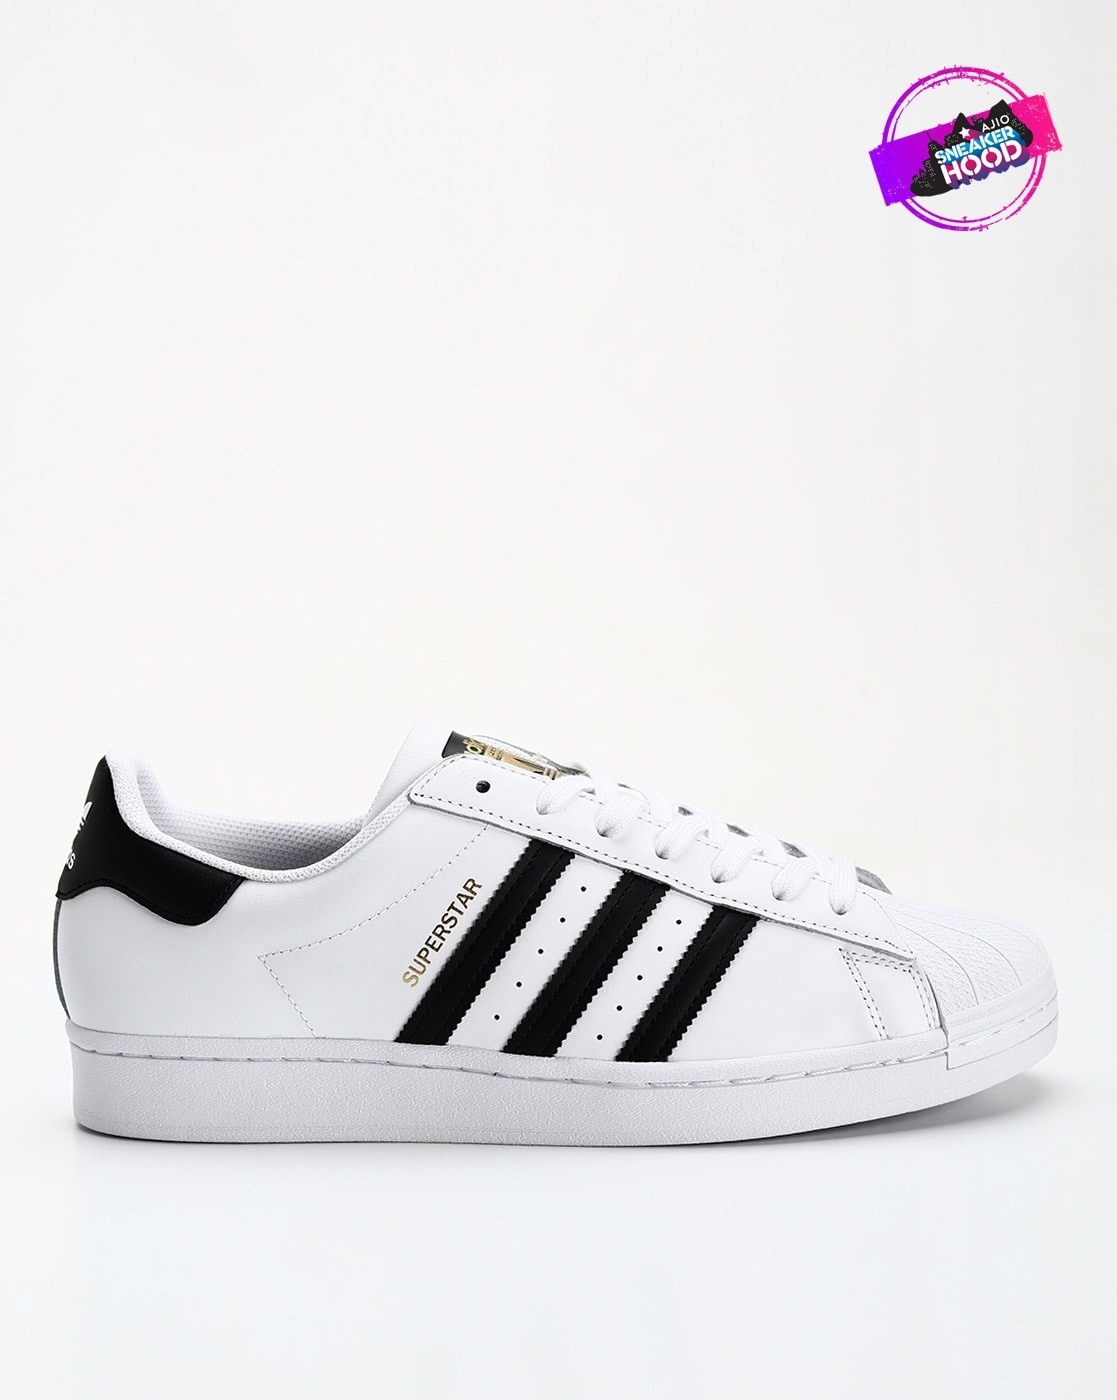 Discover 190+ adidas white sneakers super hot